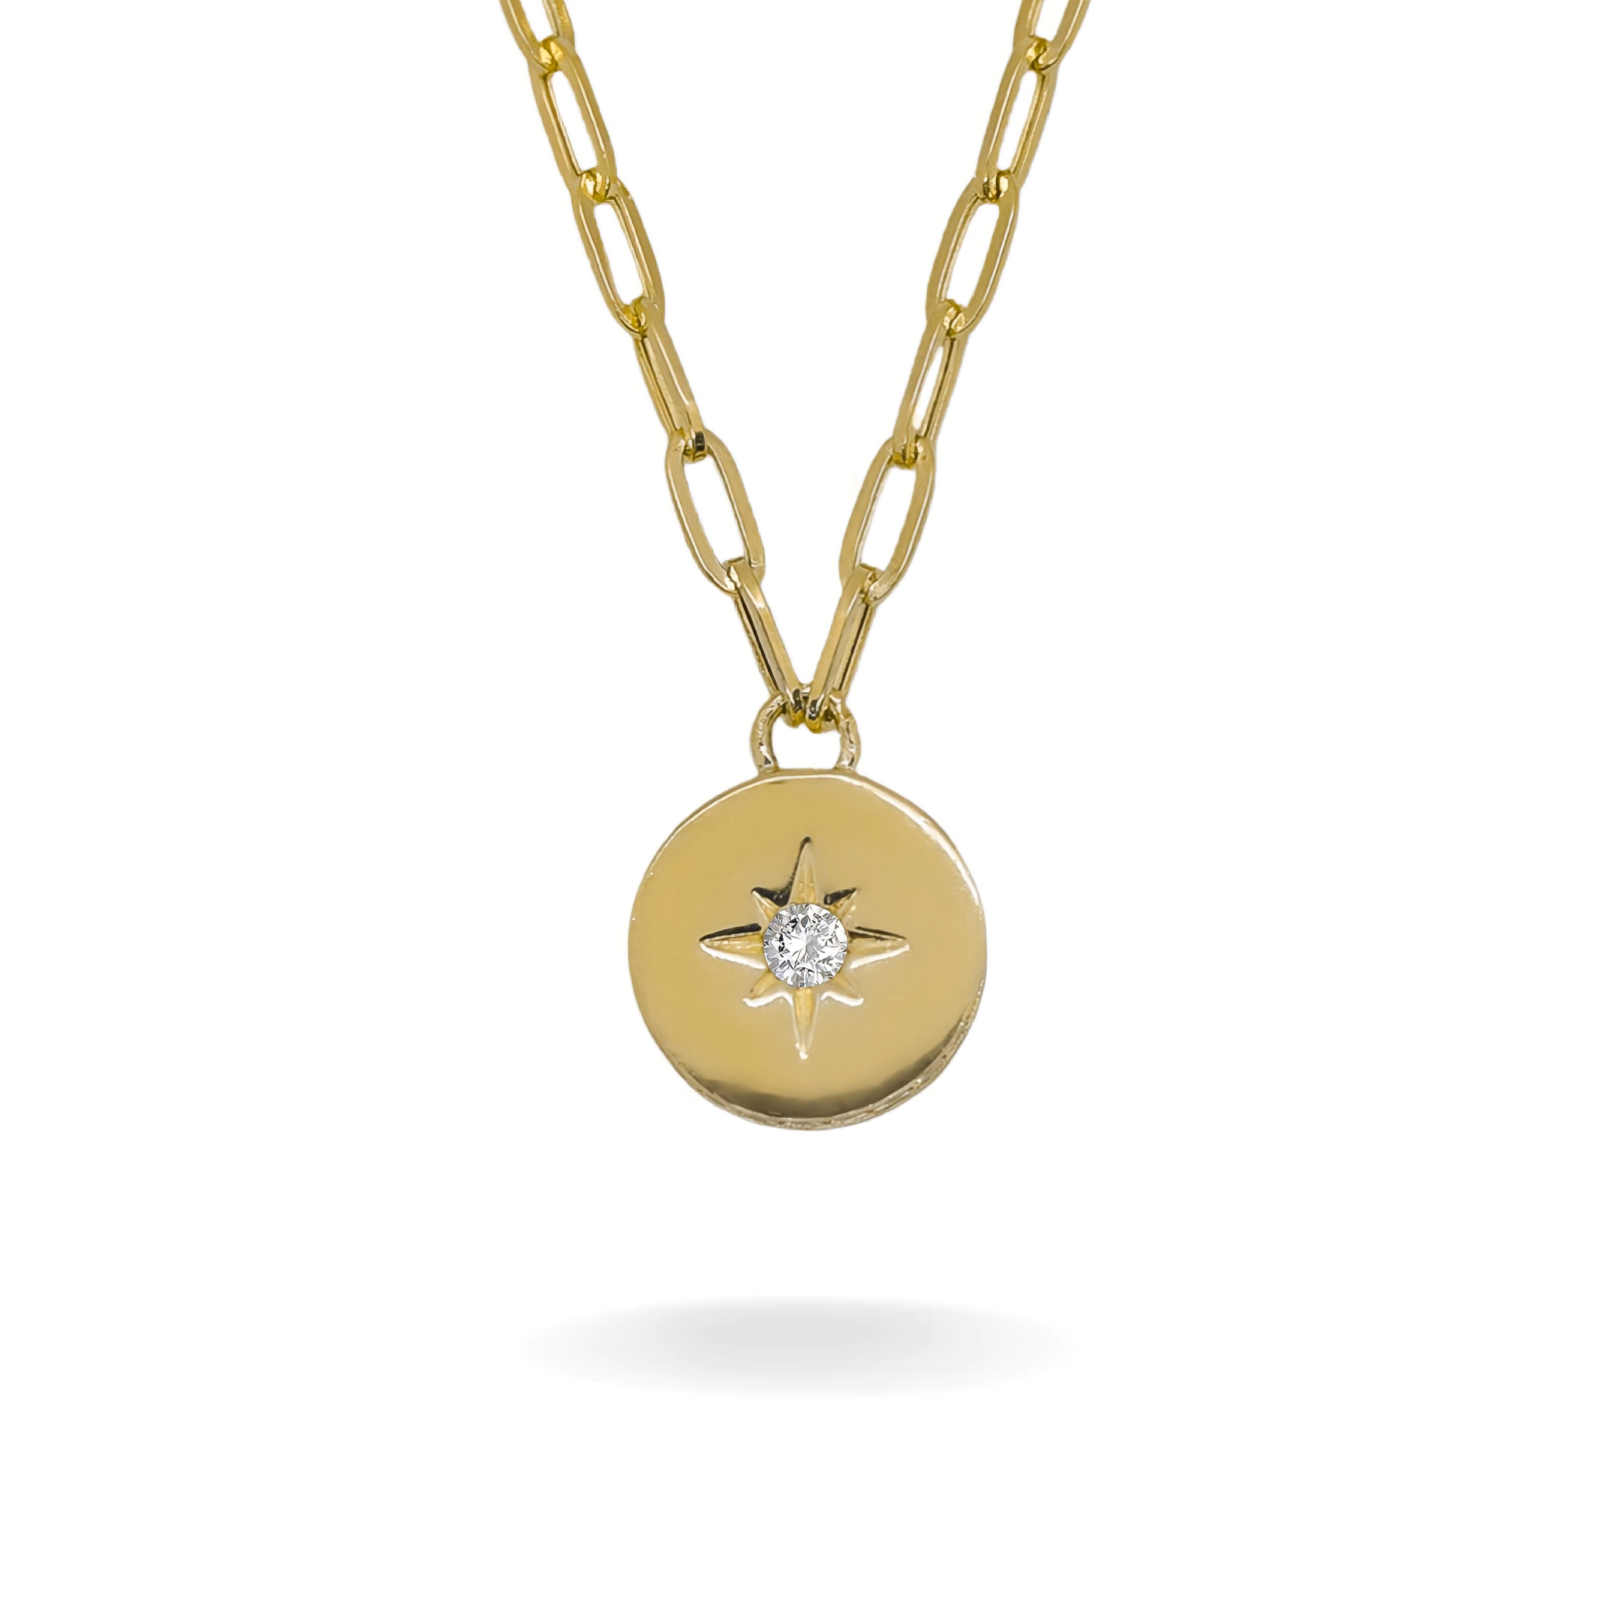 14K YELLOW GOLD STARBURST PAVÉ COIN PAPERCLIP NECKLACE